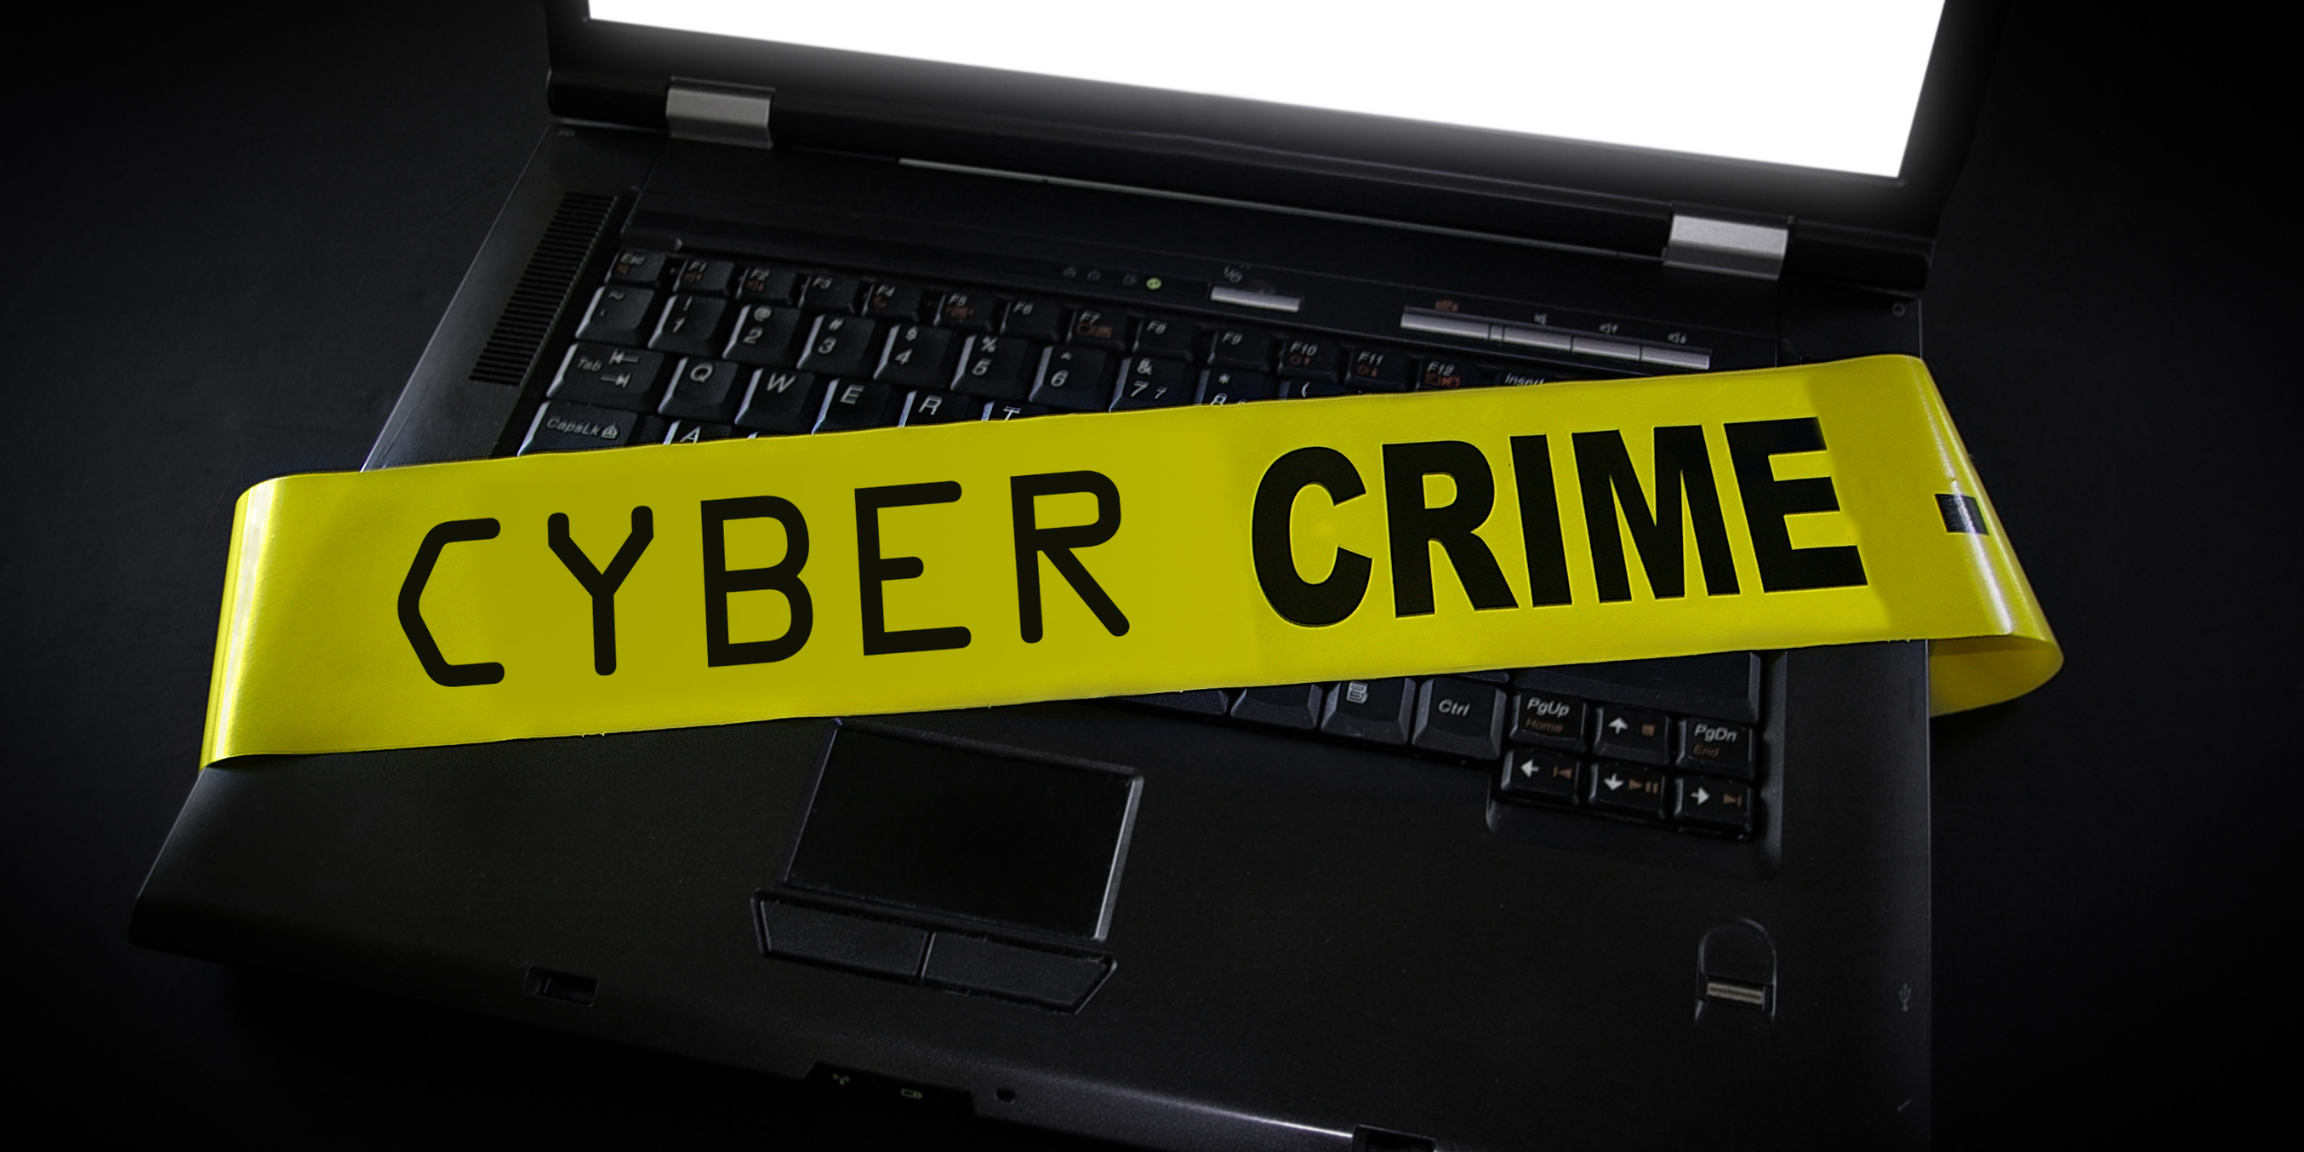 A laptop with "Cyber Crime" tape across it